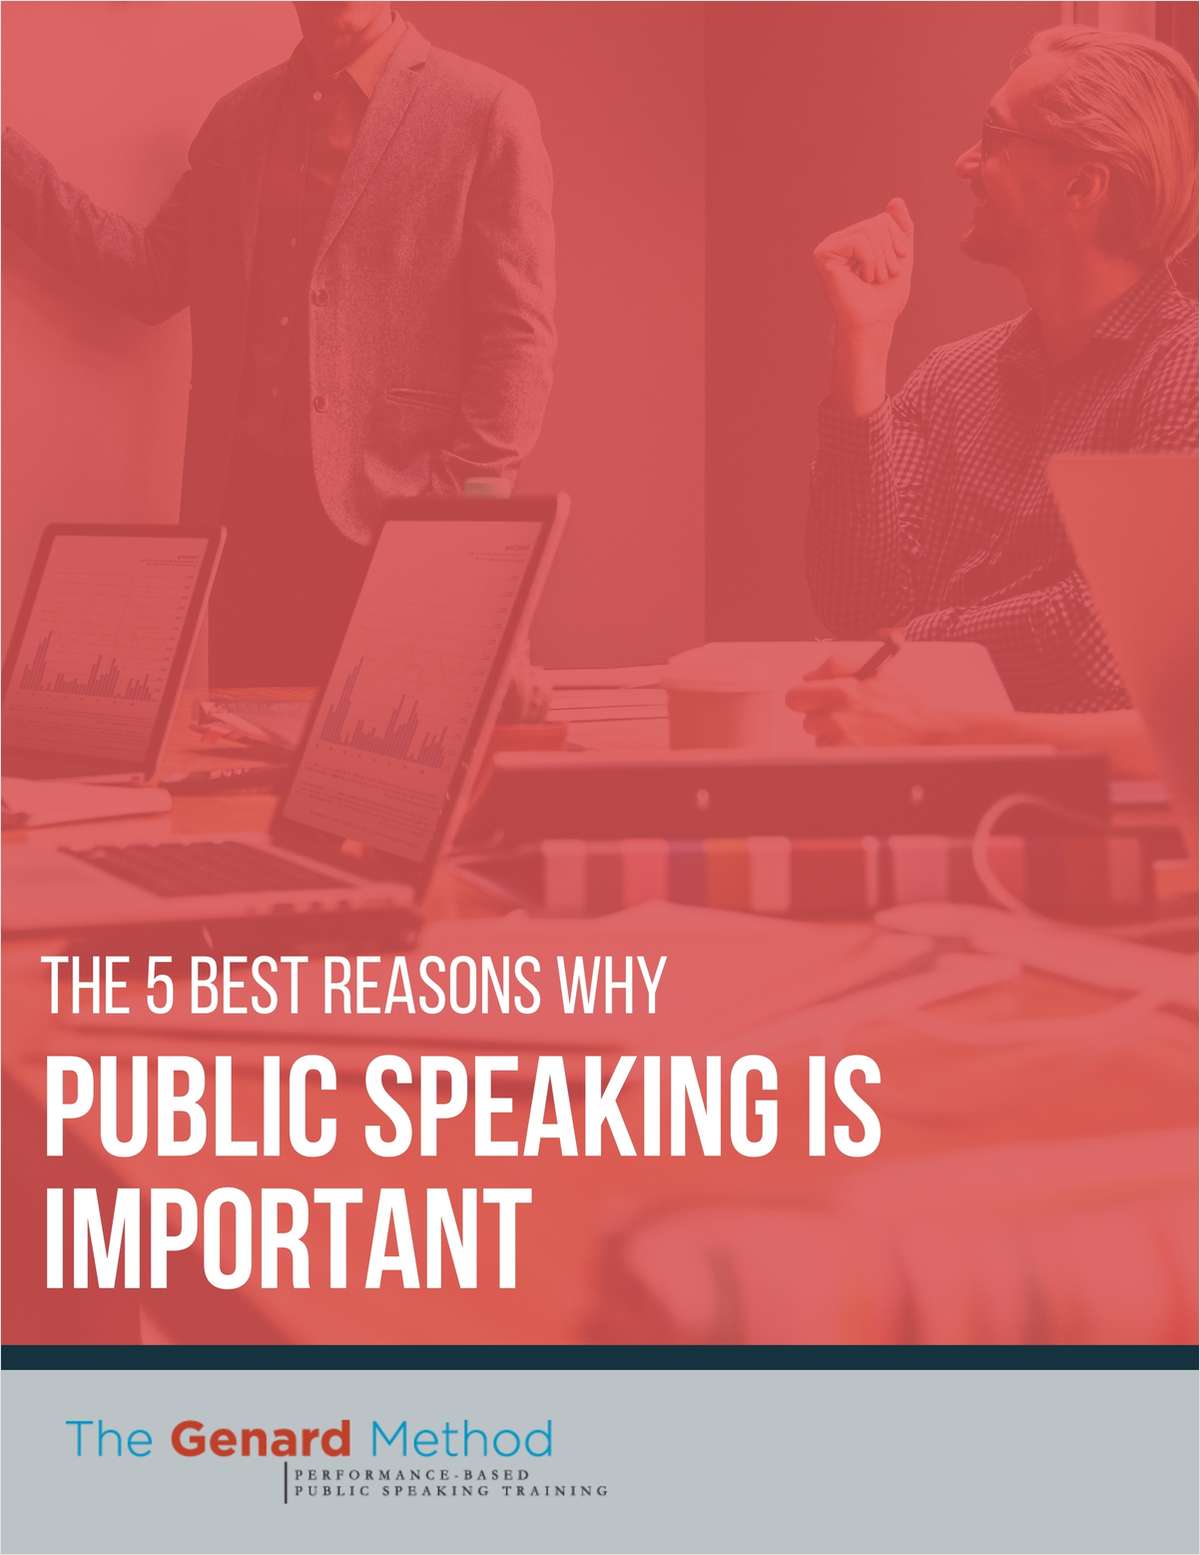 The 5 Best Reasons Why Public Speaking Is Important